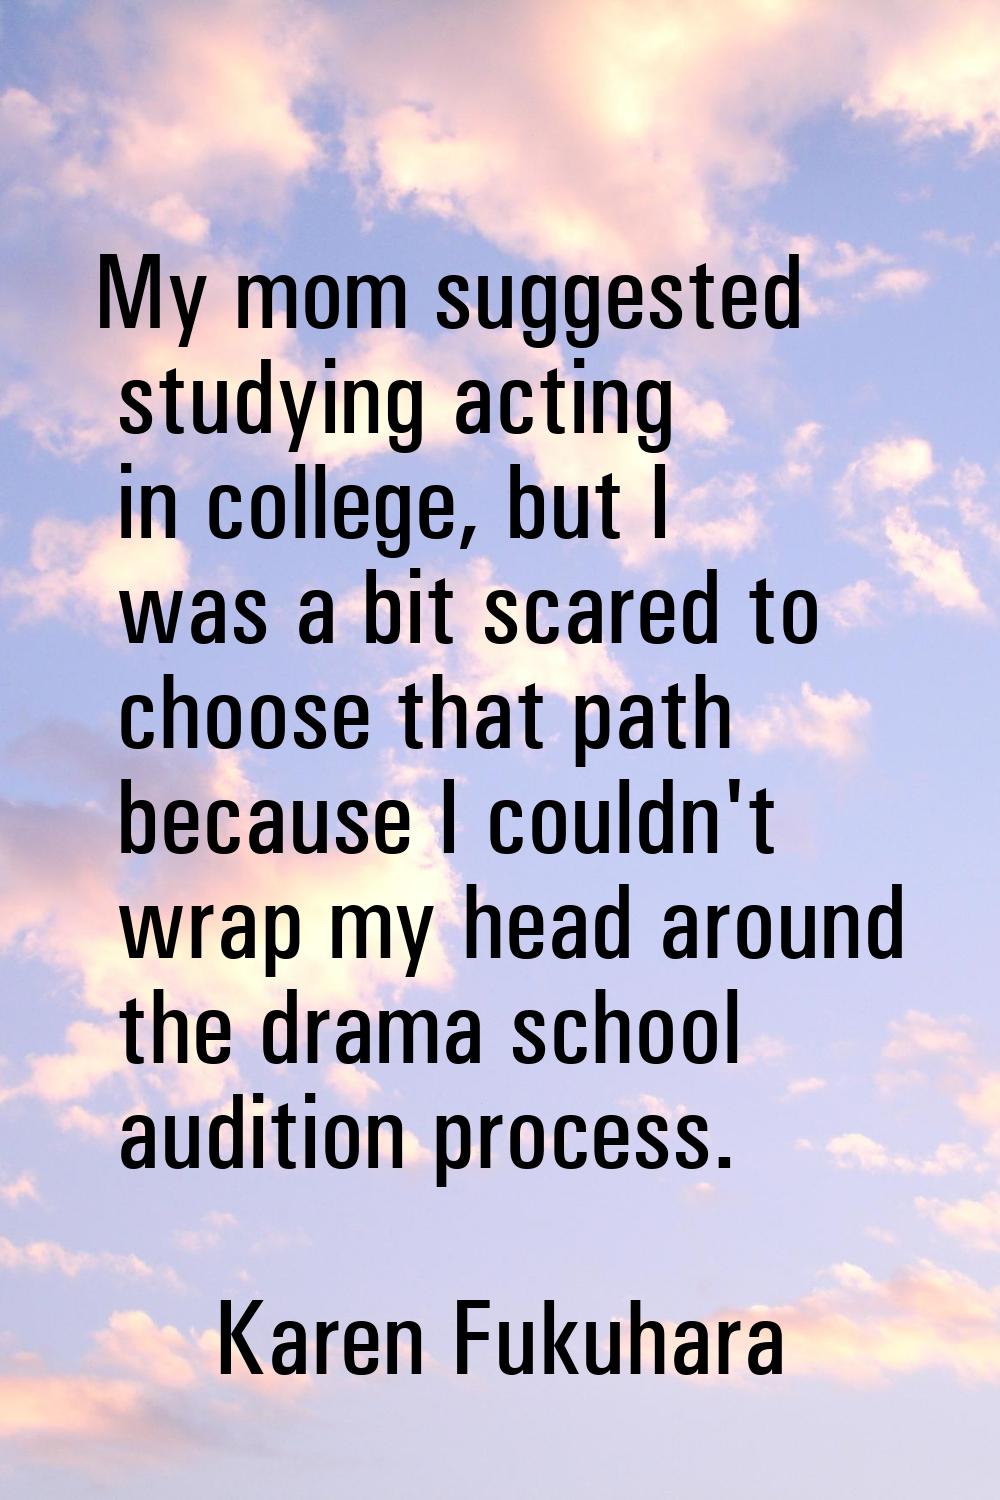 My mom suggested studying acting in college, but I was a bit scared to choose that path because I c